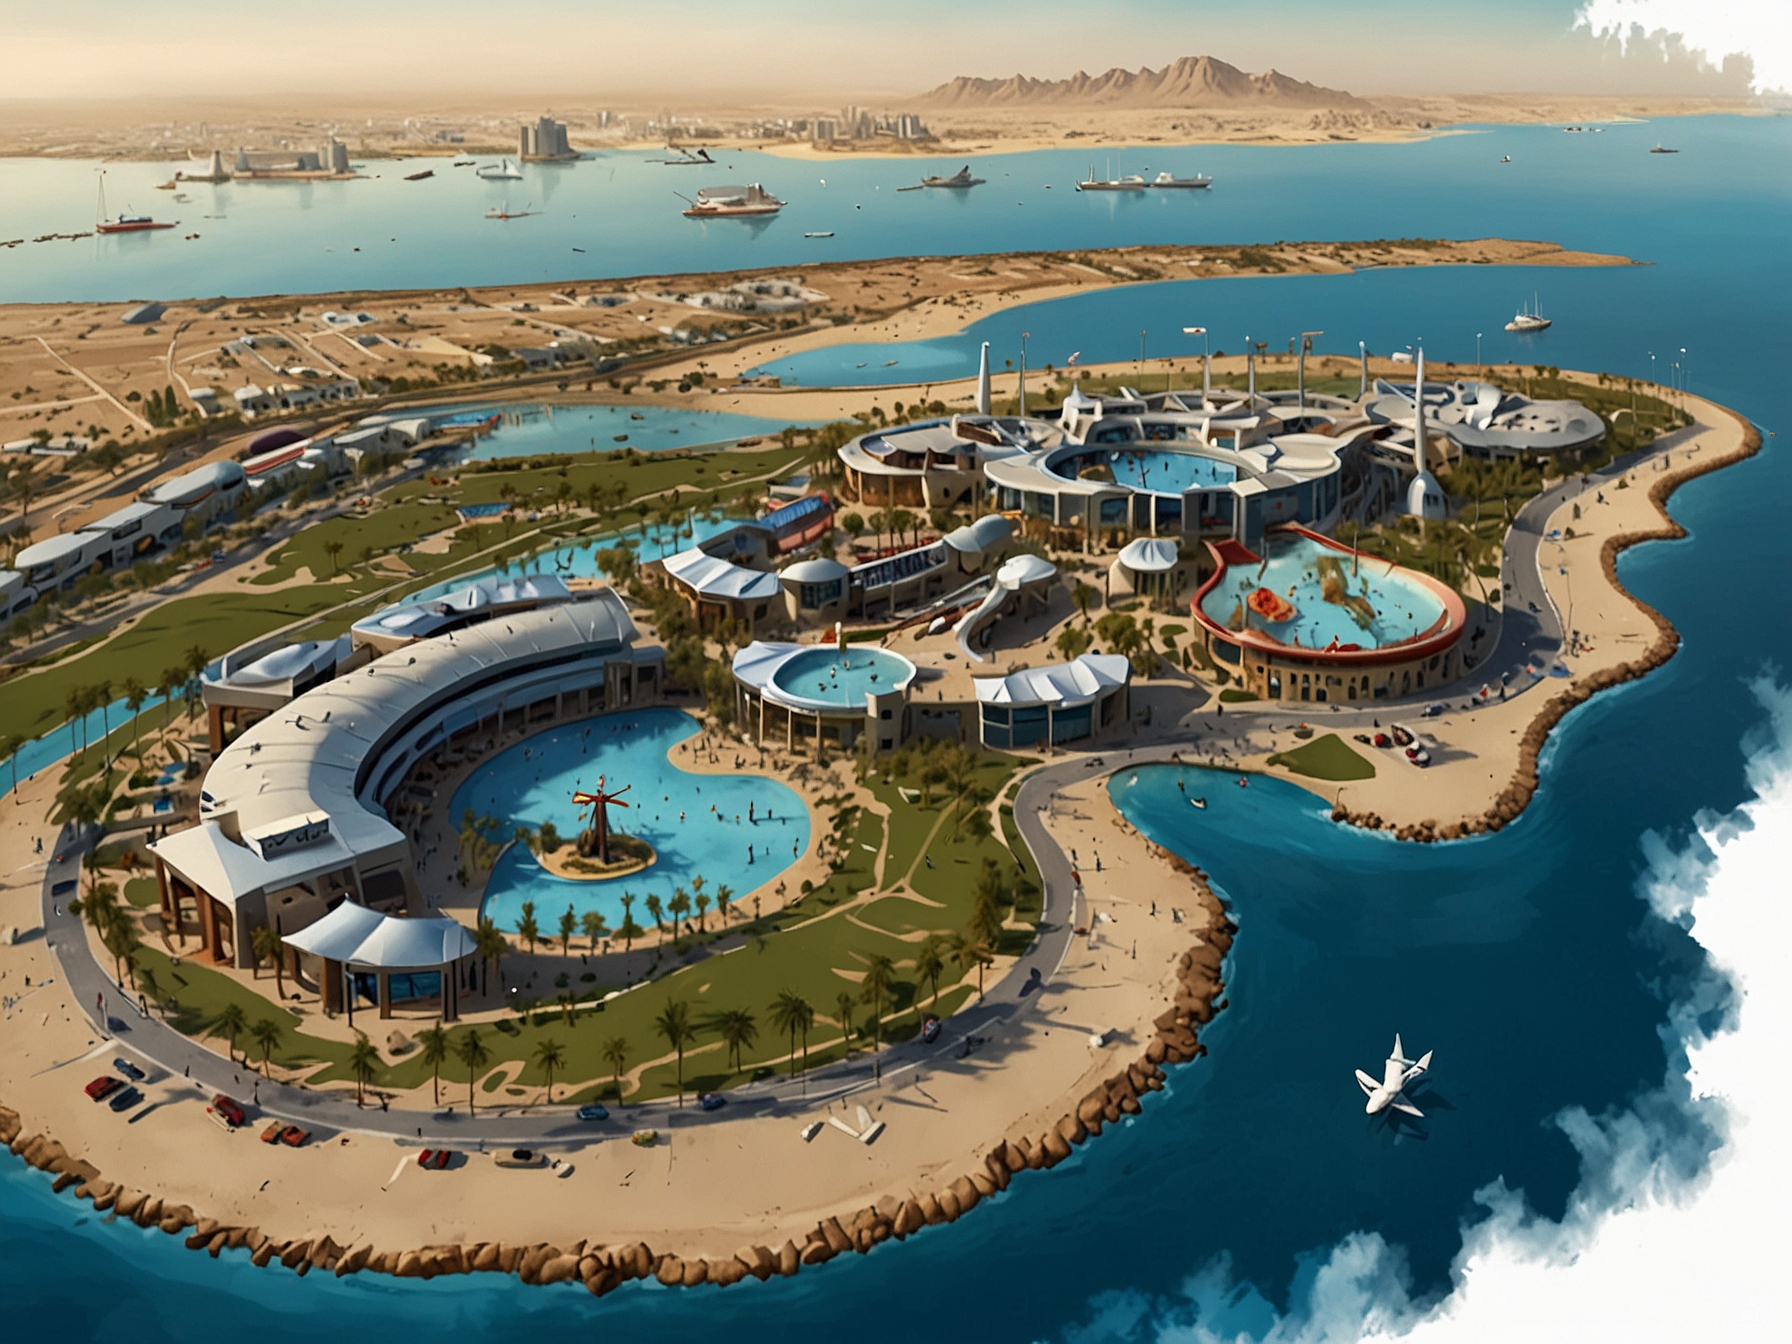 Aerial view of Yas Island showcasing its modern infrastructure, luxury hotels, and iconic attractions like Ferrari World and Yas Waterworld surrounded by the Arabian Gulf.